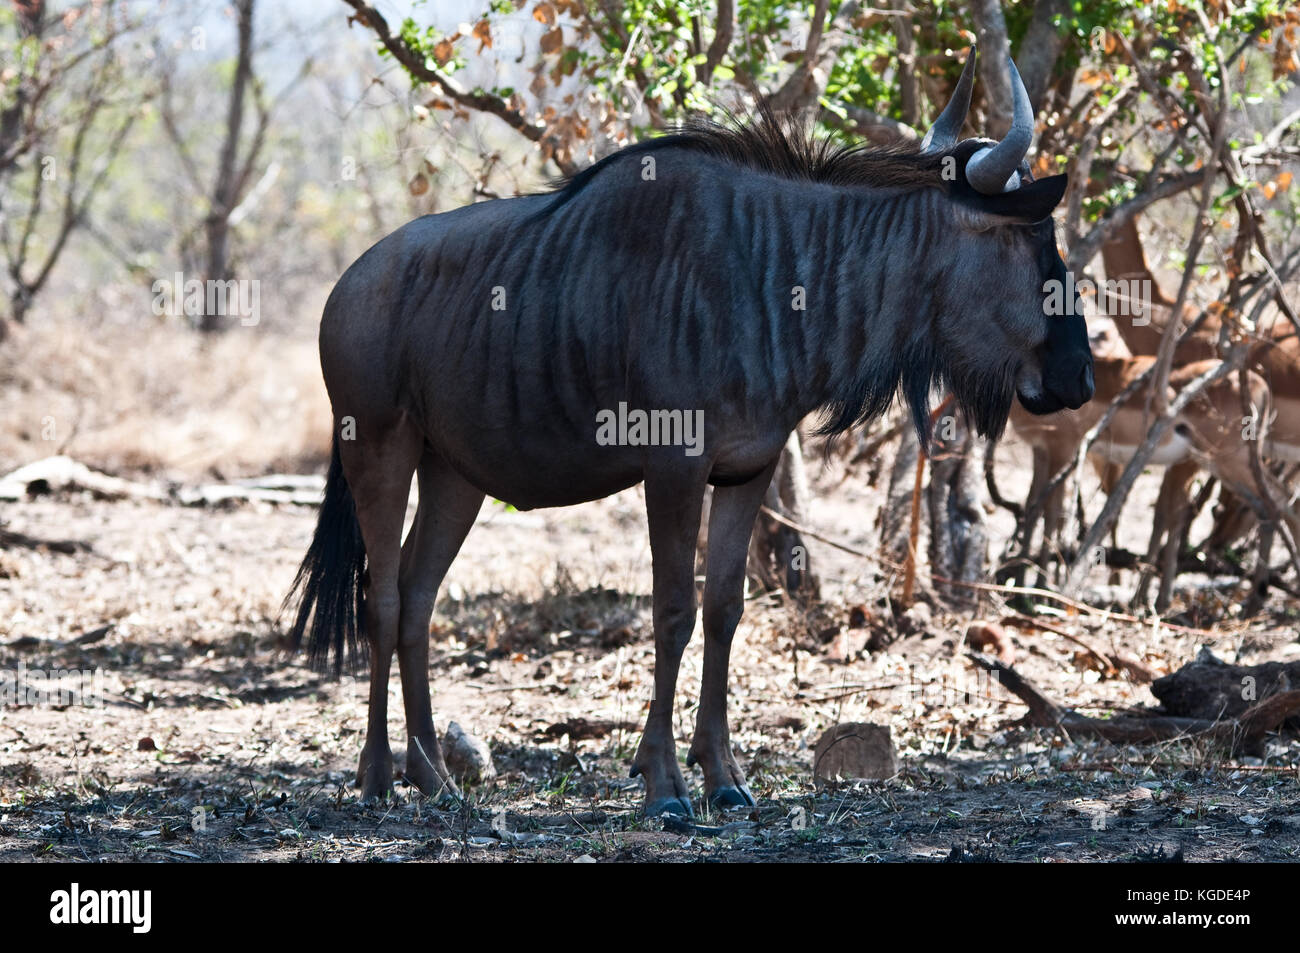 A Blue Wildebeest (Connochaetes taurinus) stands in front of some Impala in the African Bushveldt. Stock Photo